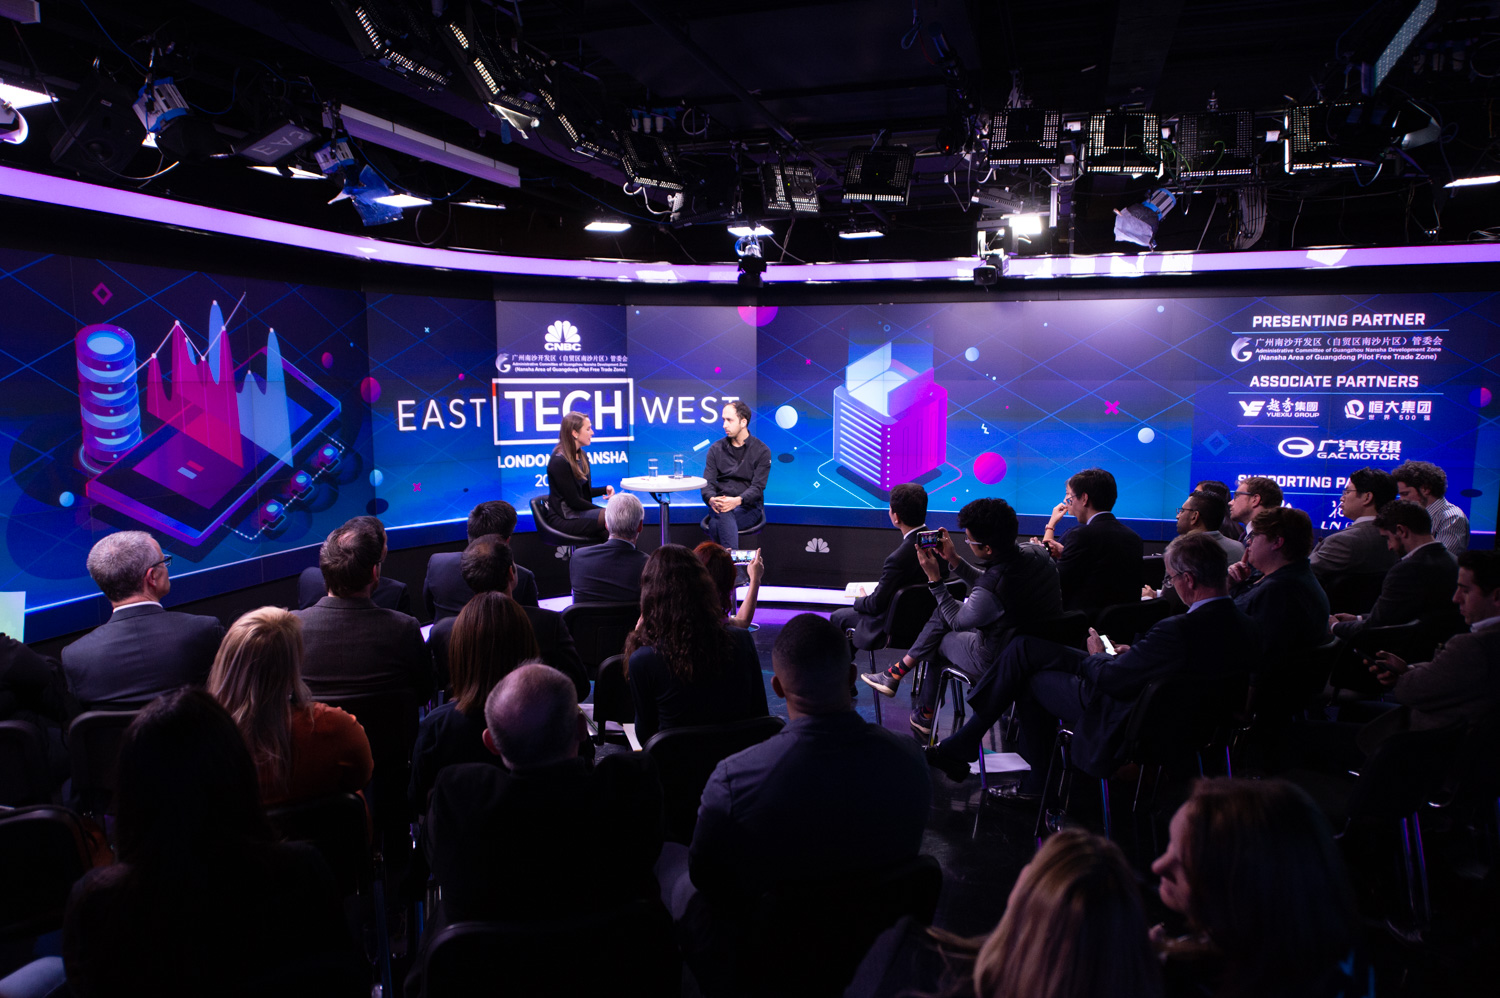 CNBC set to bring together world's most influential tech leaders in Nansha for new annual tech conference: EAST TECH WEST